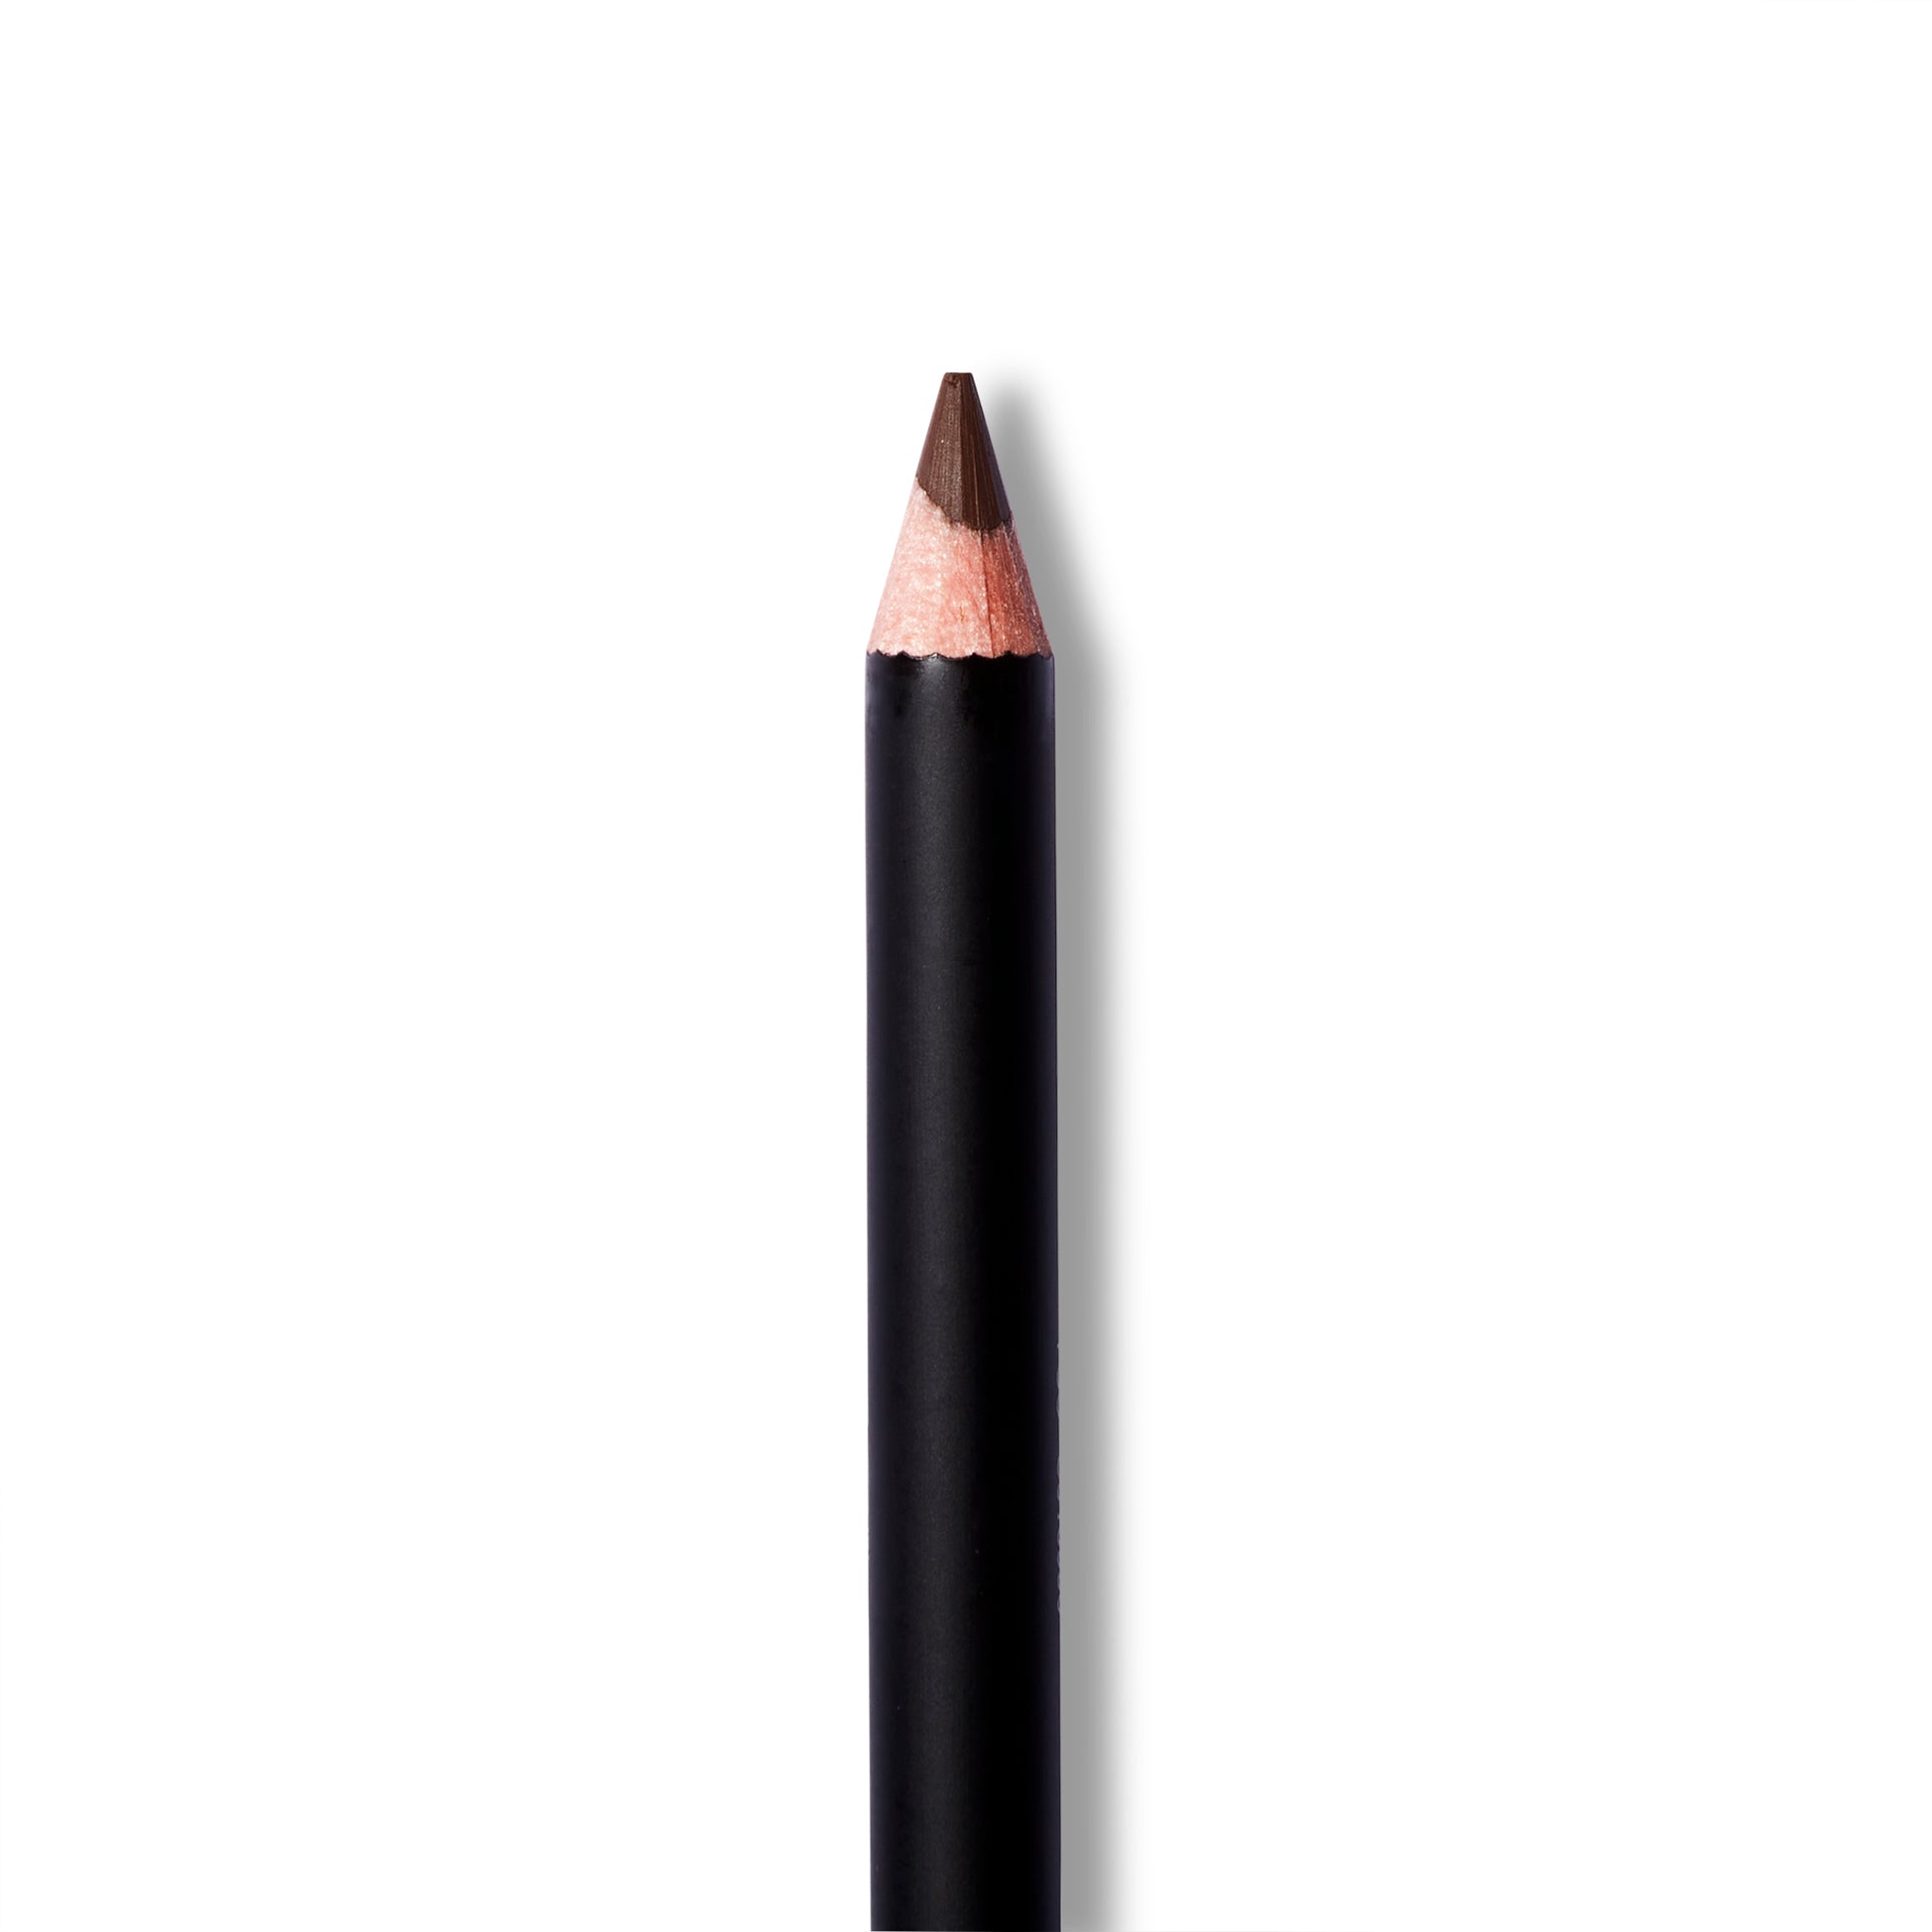 A close up of the Antonym brown eyeliner with the cap off. The eyeliner pencil is sharp.